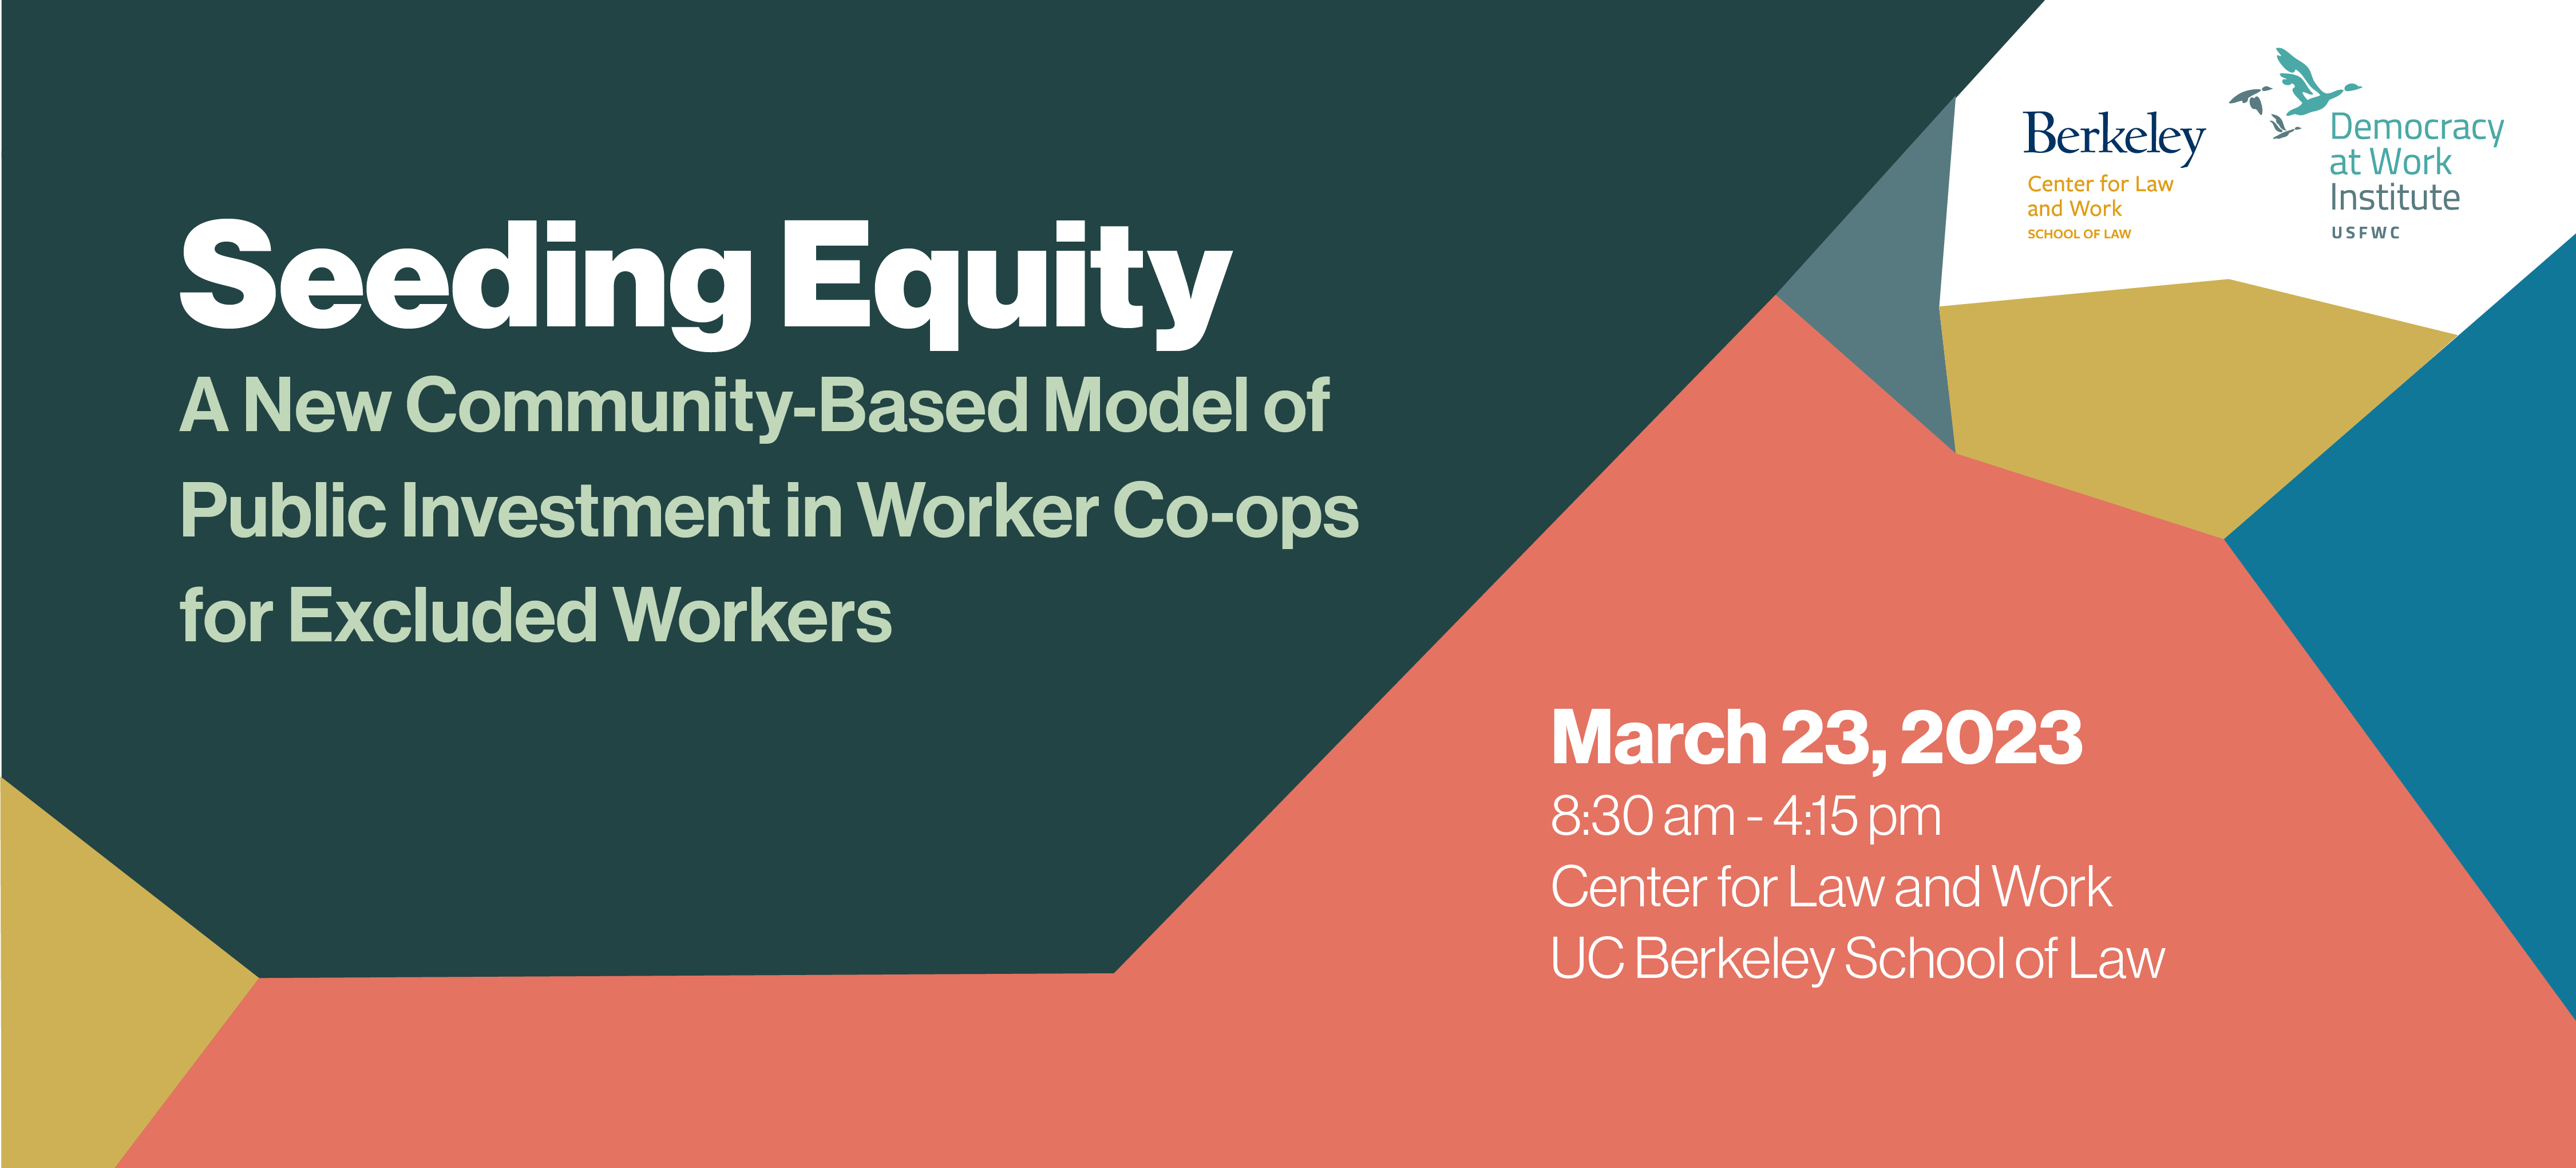 Seeding Equity A New Community-Based Model of Public Investment in Worker Co-ops for Excluded Workers